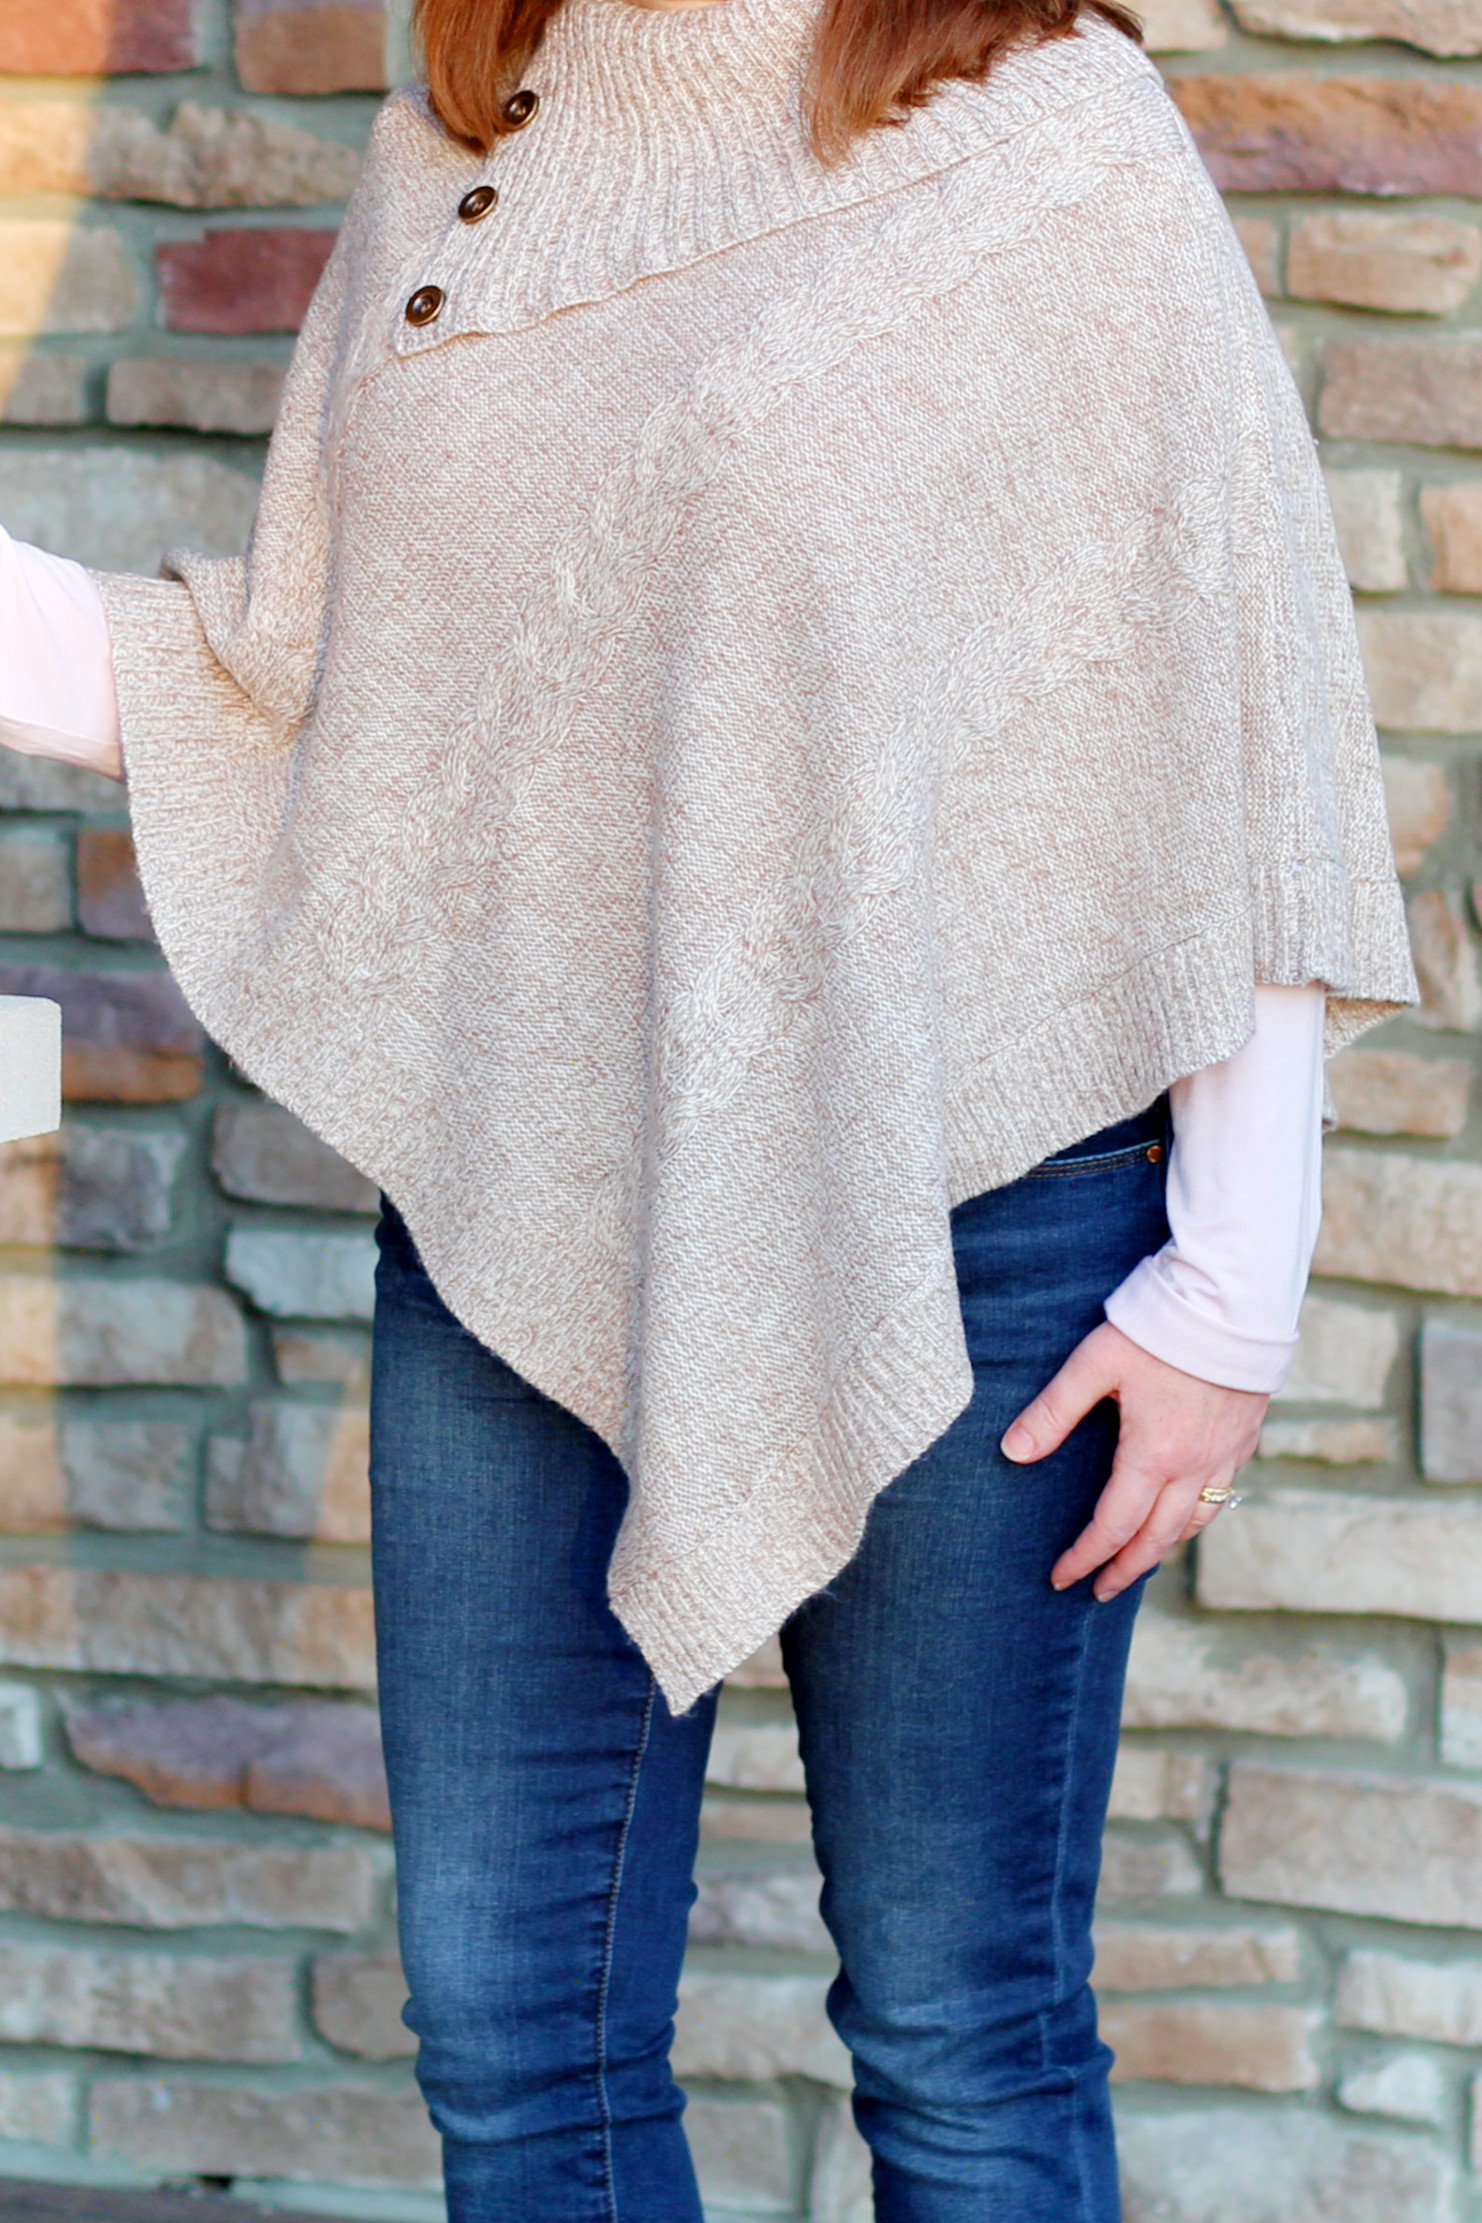 I love this Karen Scott poncho!  It is so soft and comfortable at an amazing price!  #shoppingoutfit #poncho  #ponchooutfit #ponchooutfitwinter 